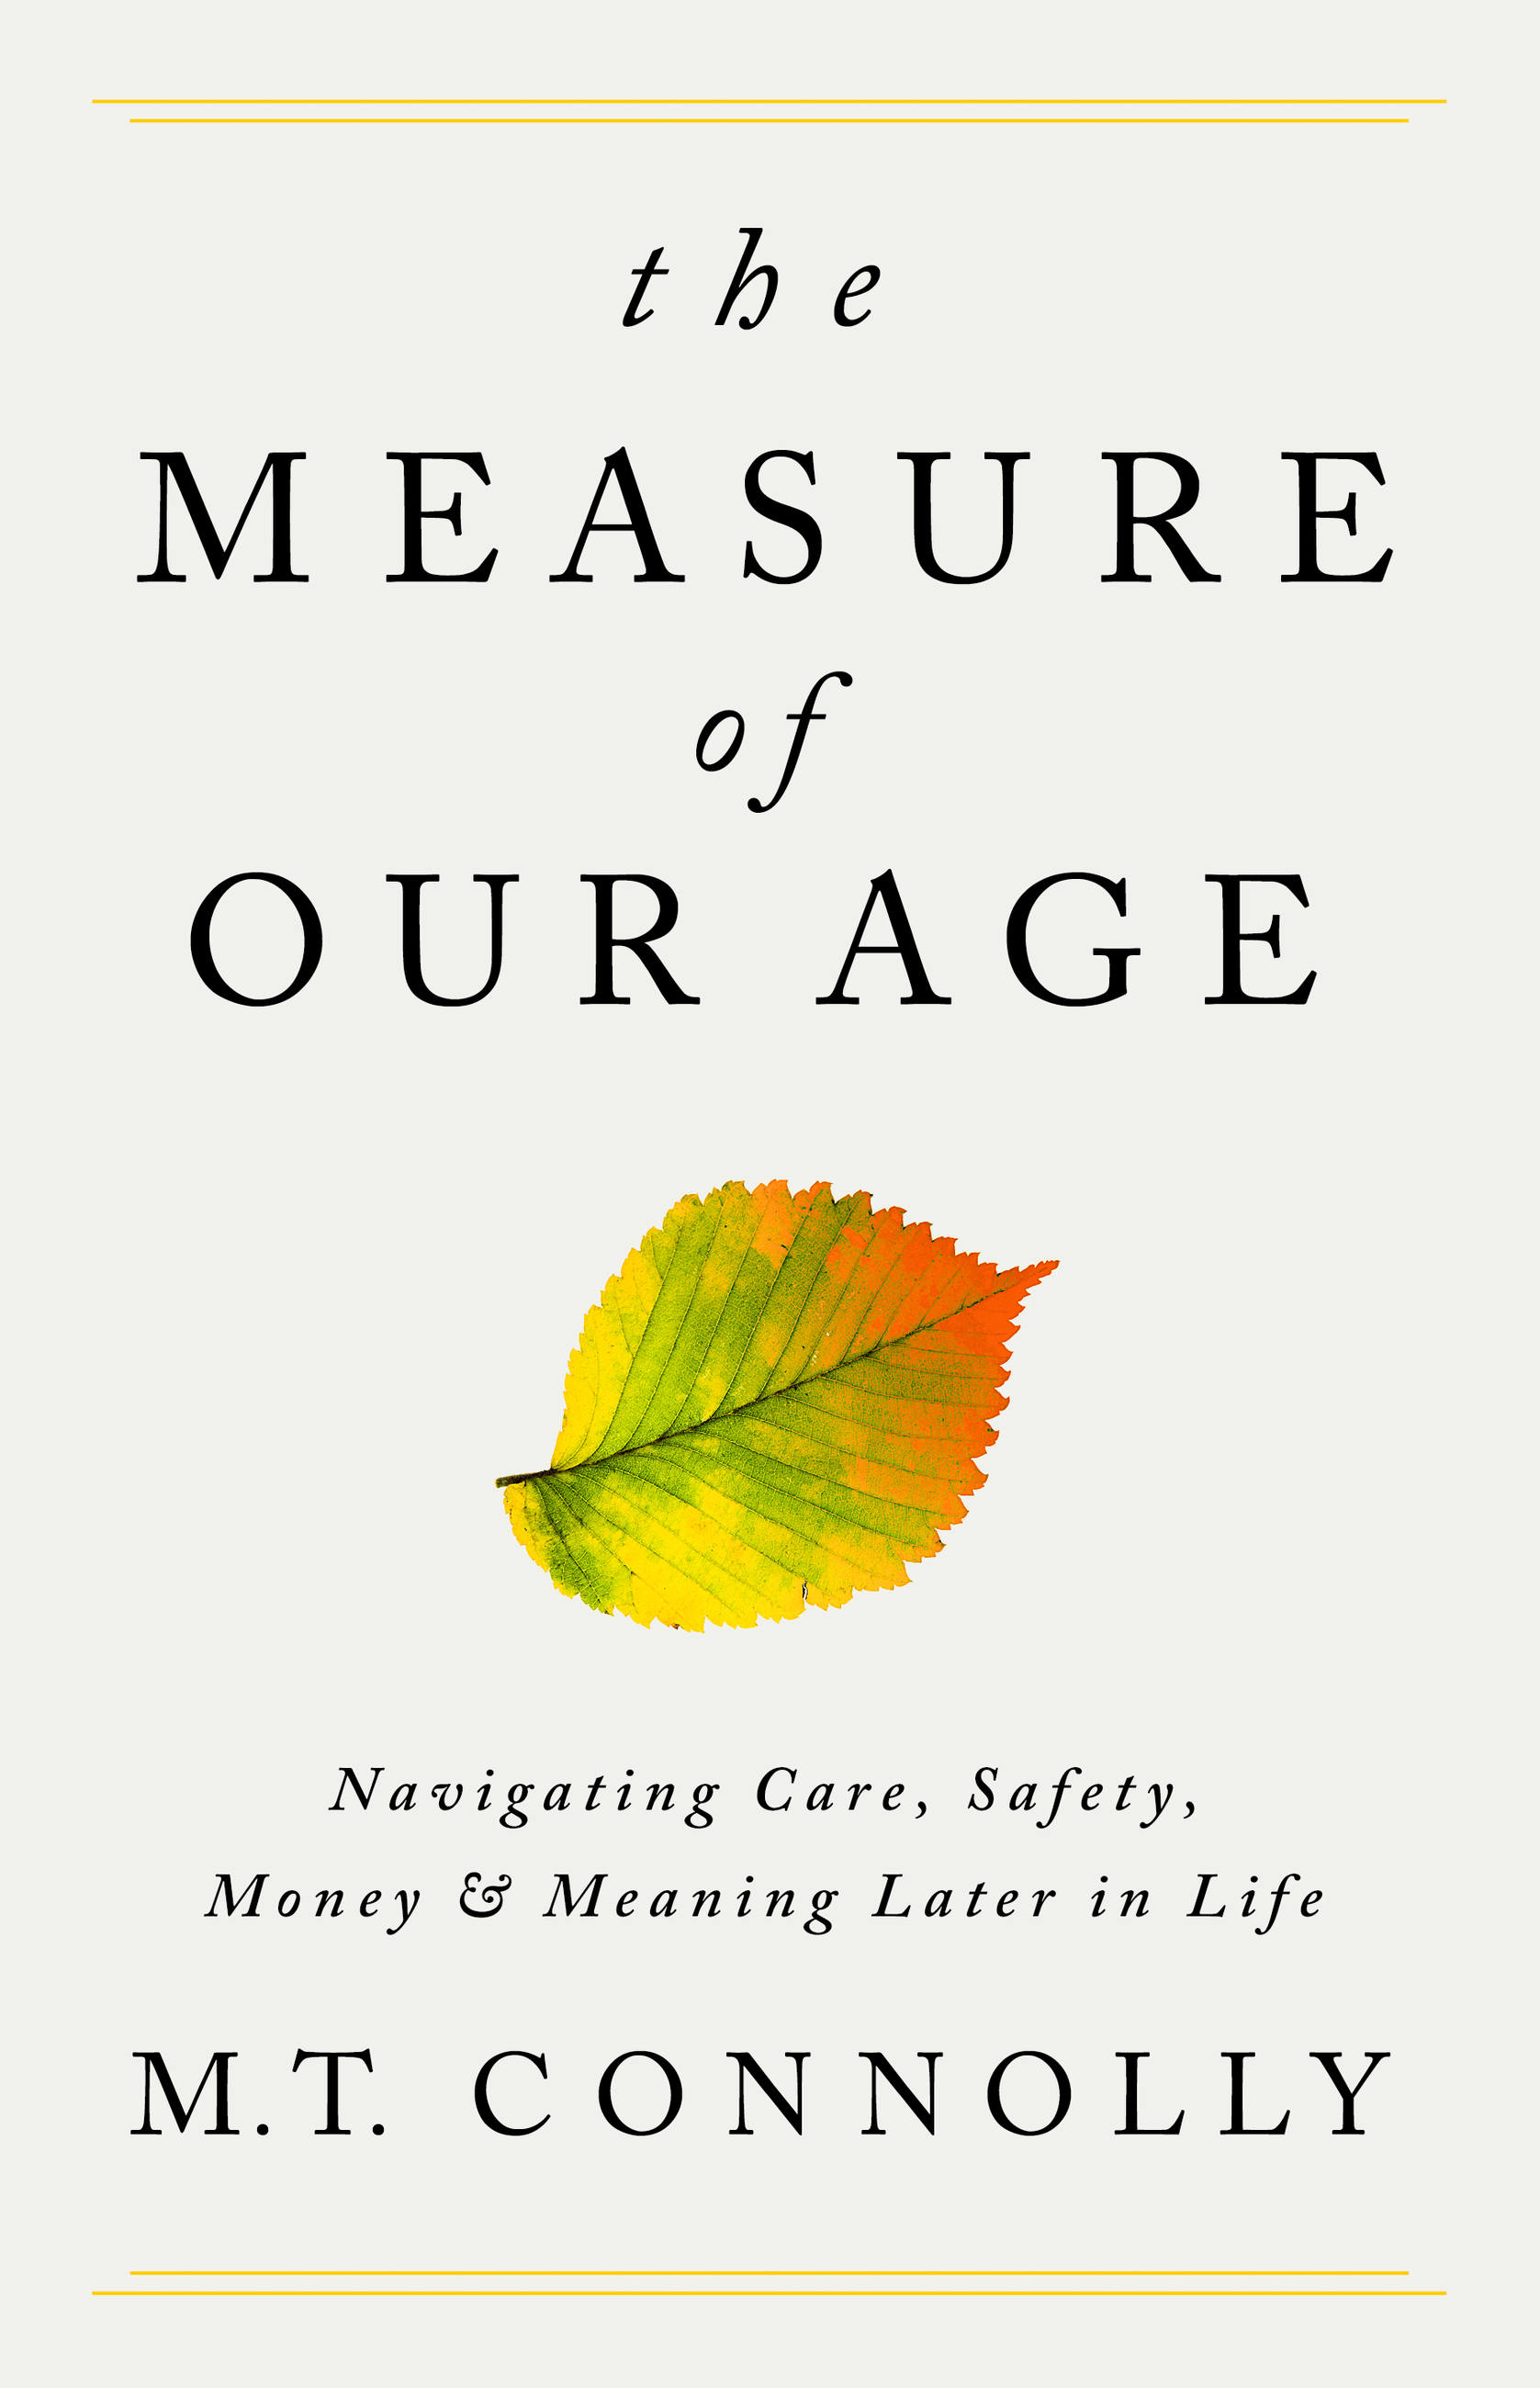 The Measure of Our Age by M.T. Connolly | Hachette Book Group